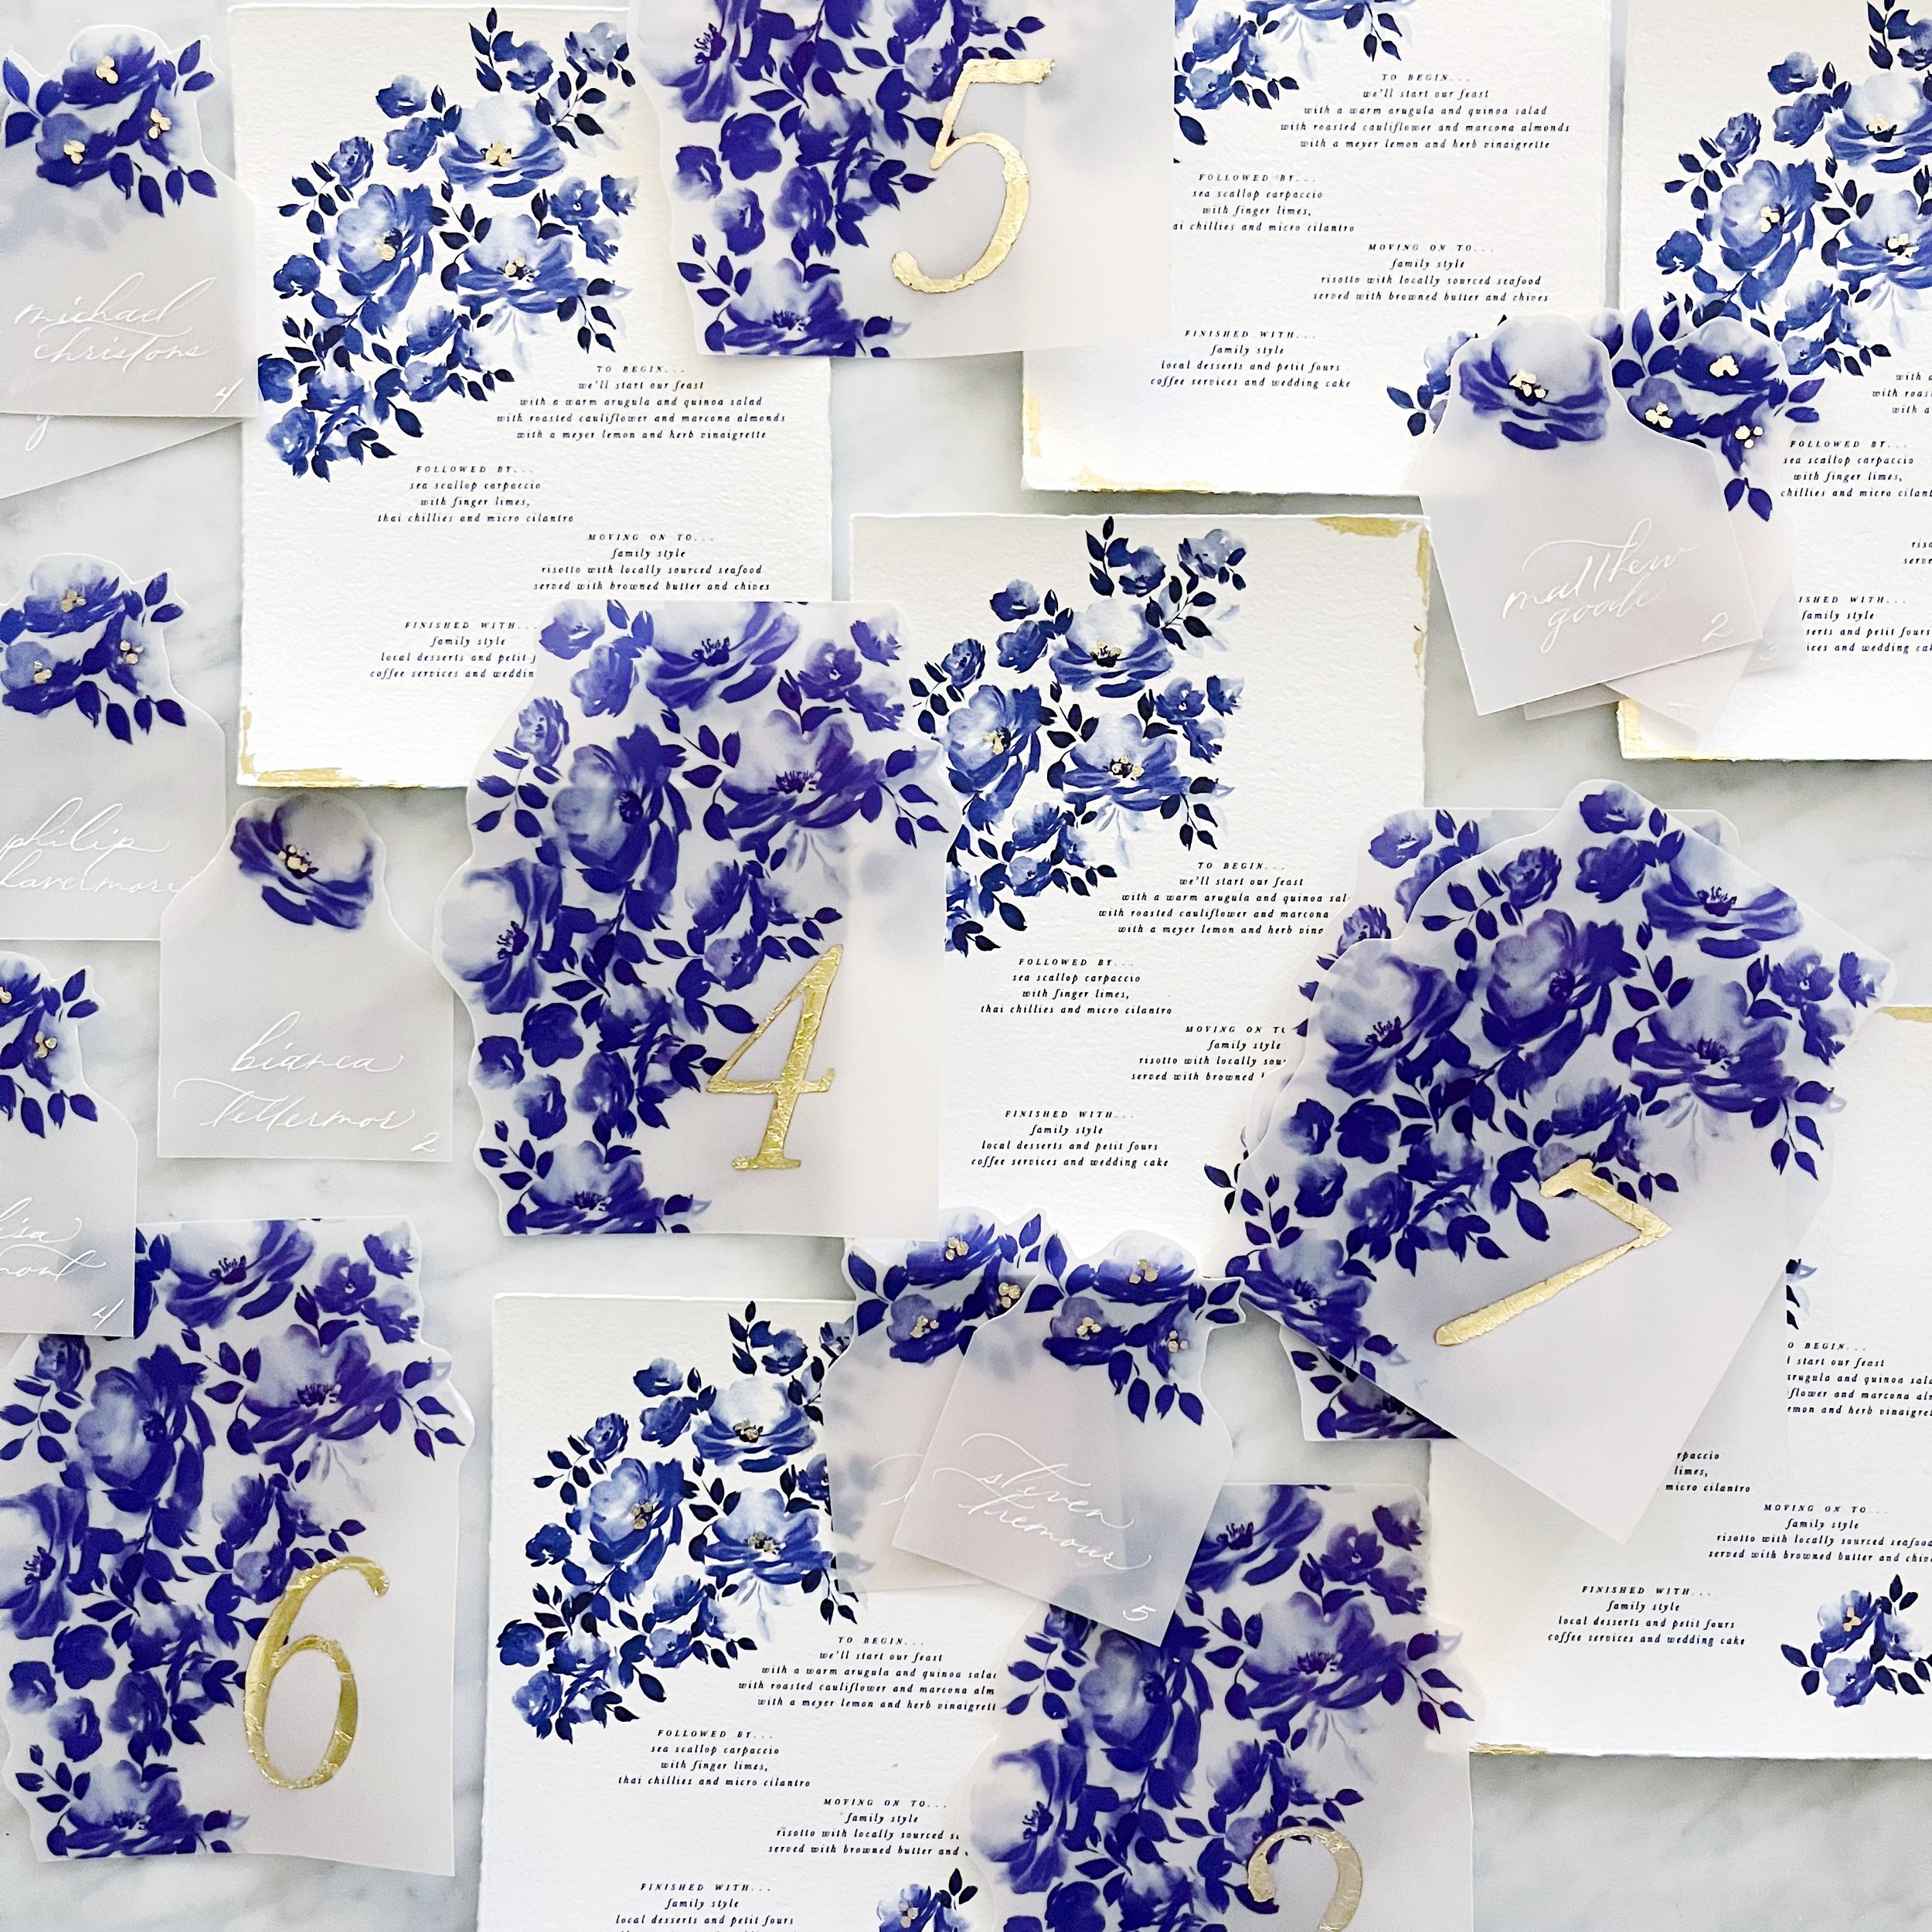 Chinoiserie Spring Personalized Recipe Cards by Boatman Geller